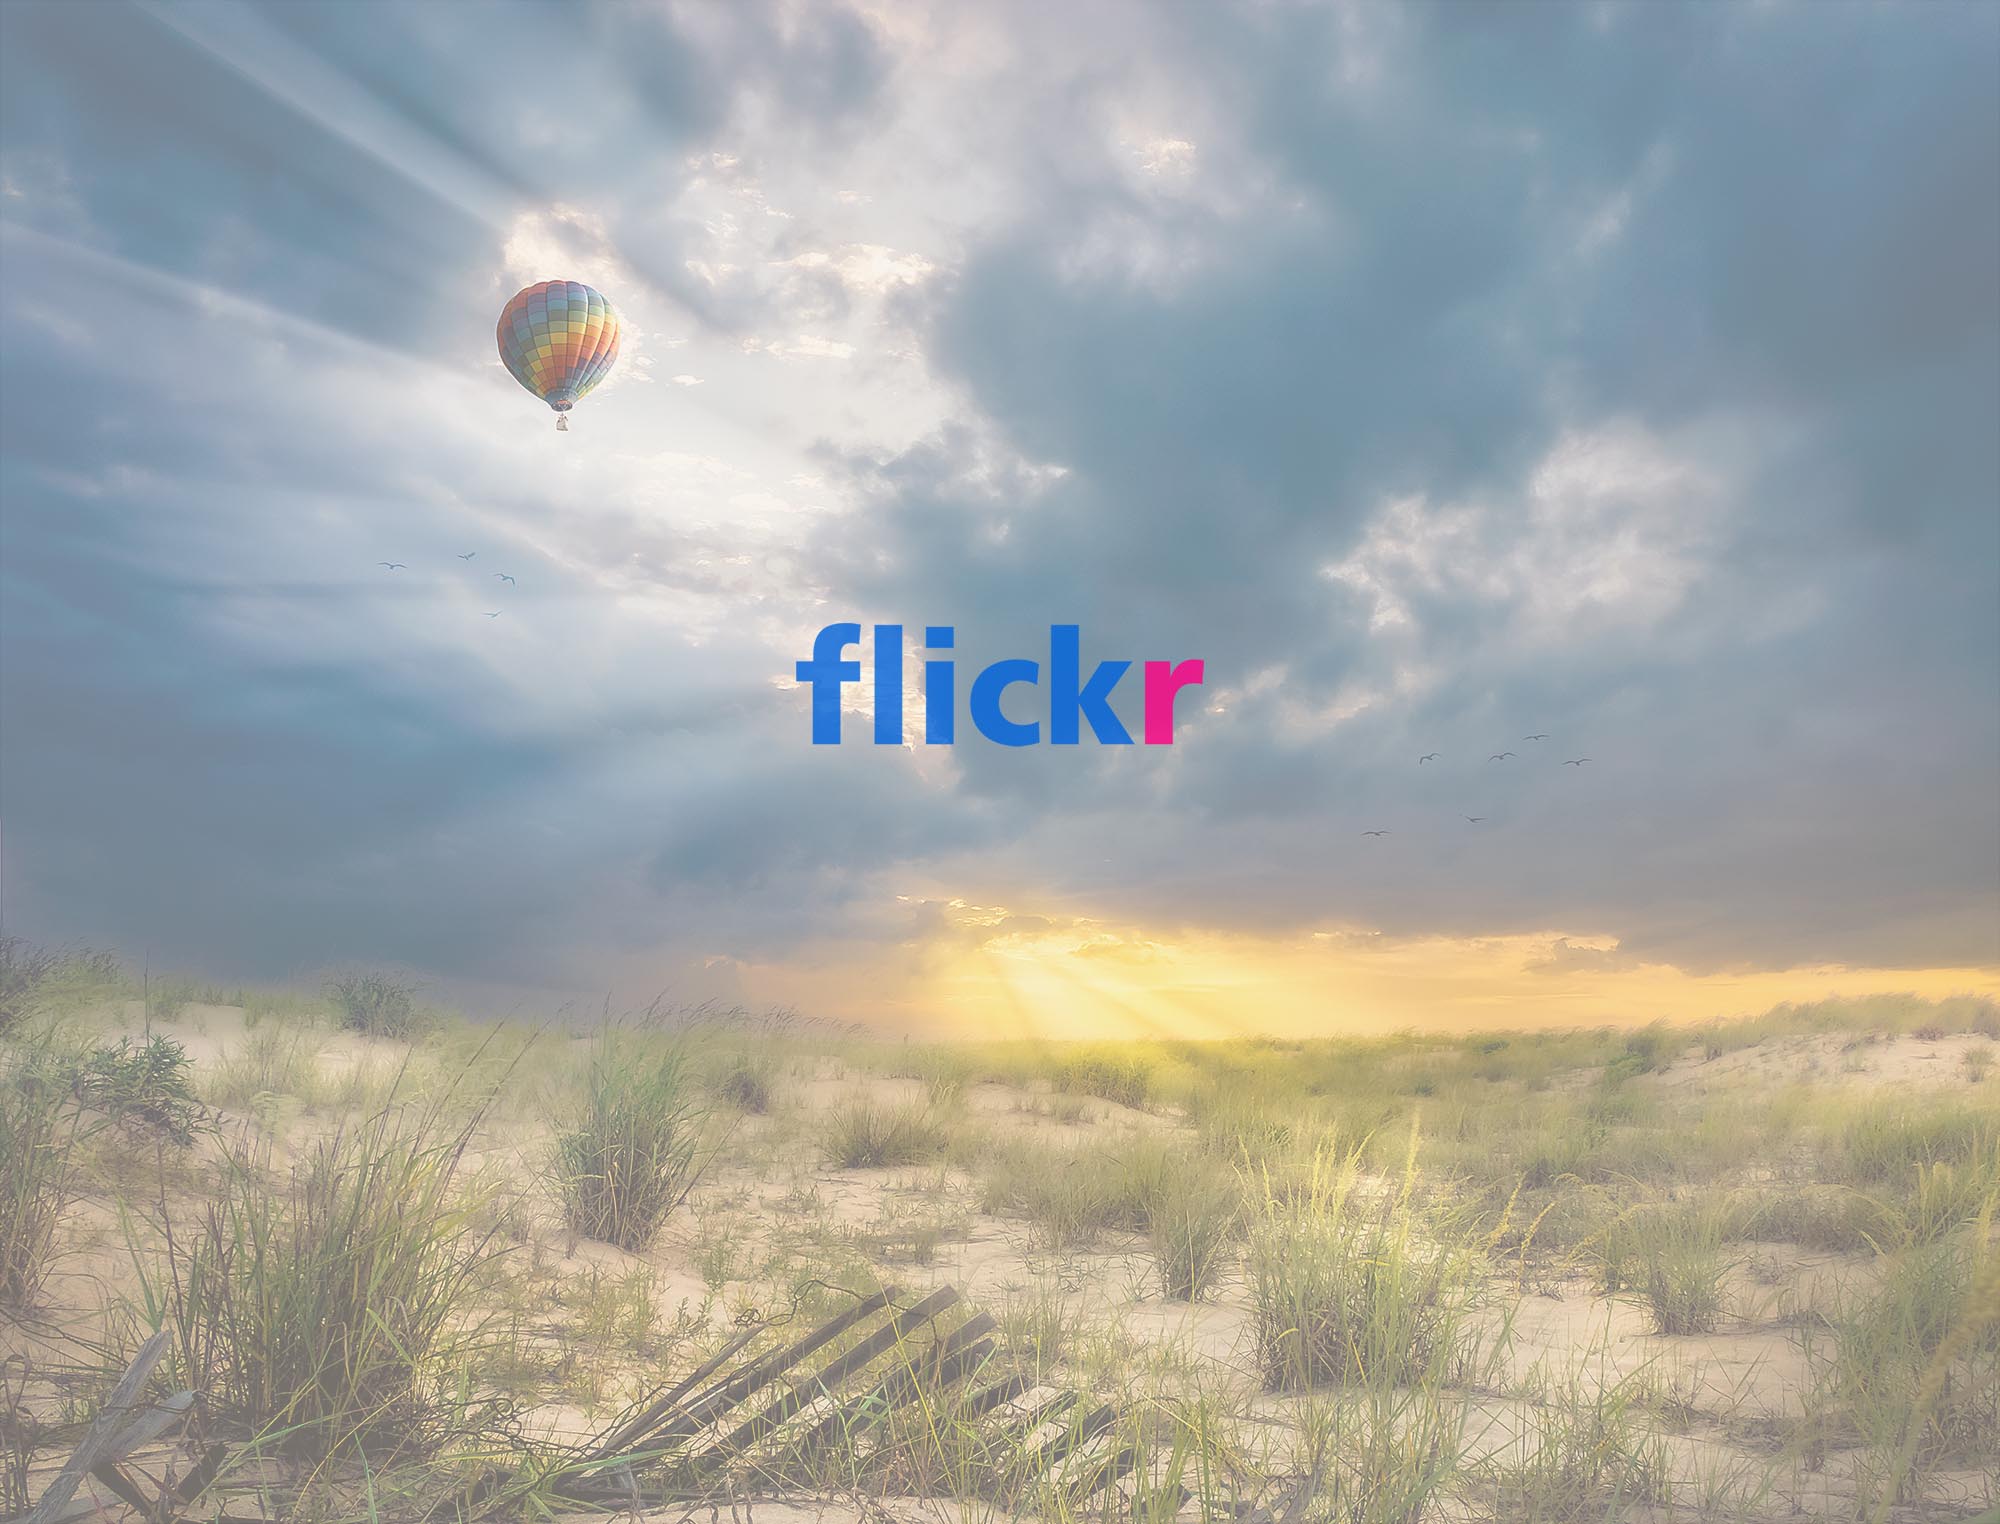 Join Our Flickr Group!